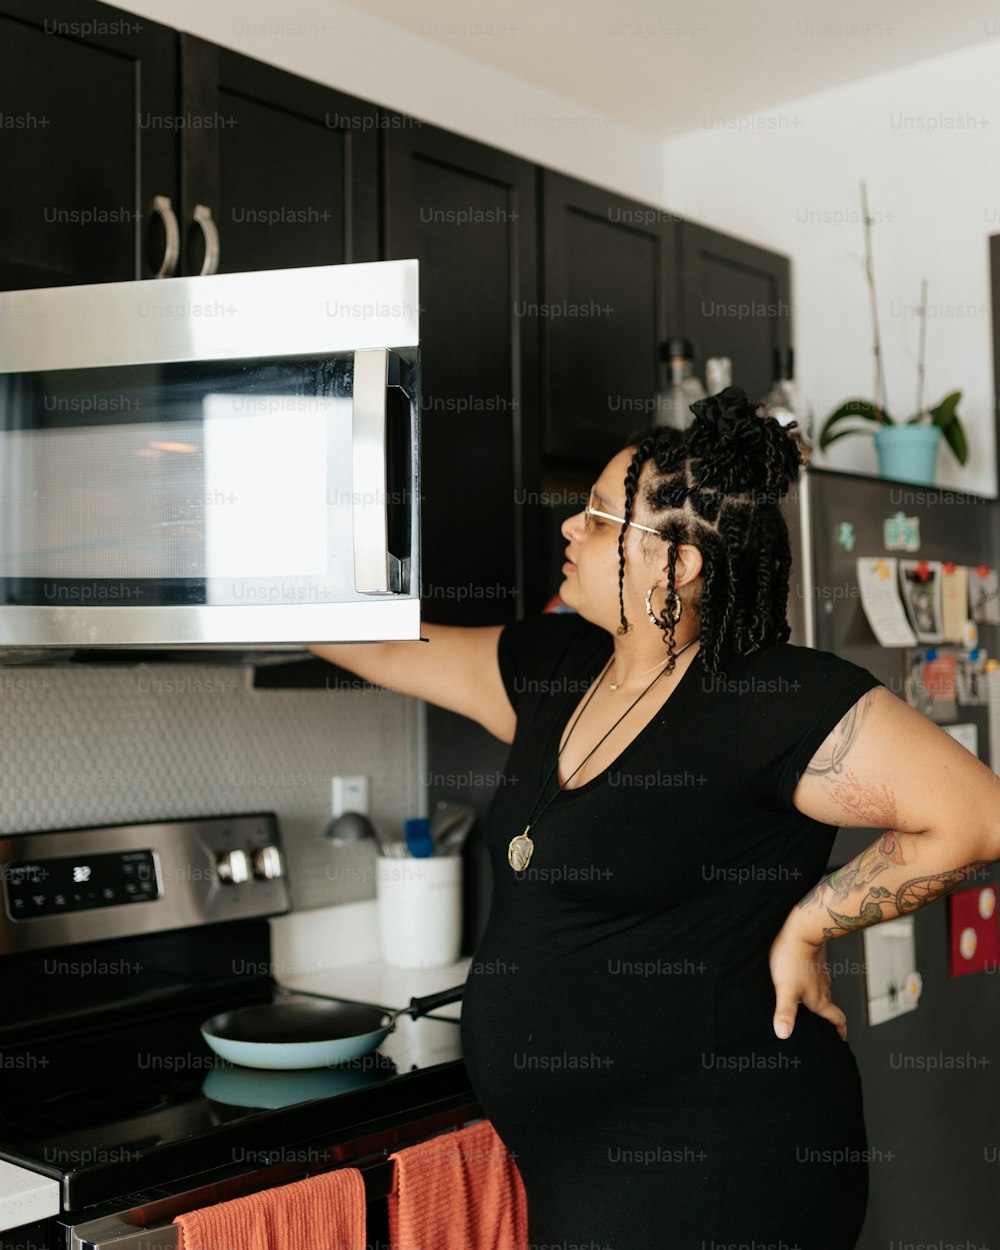 a woman in a black dress is holding a microwave